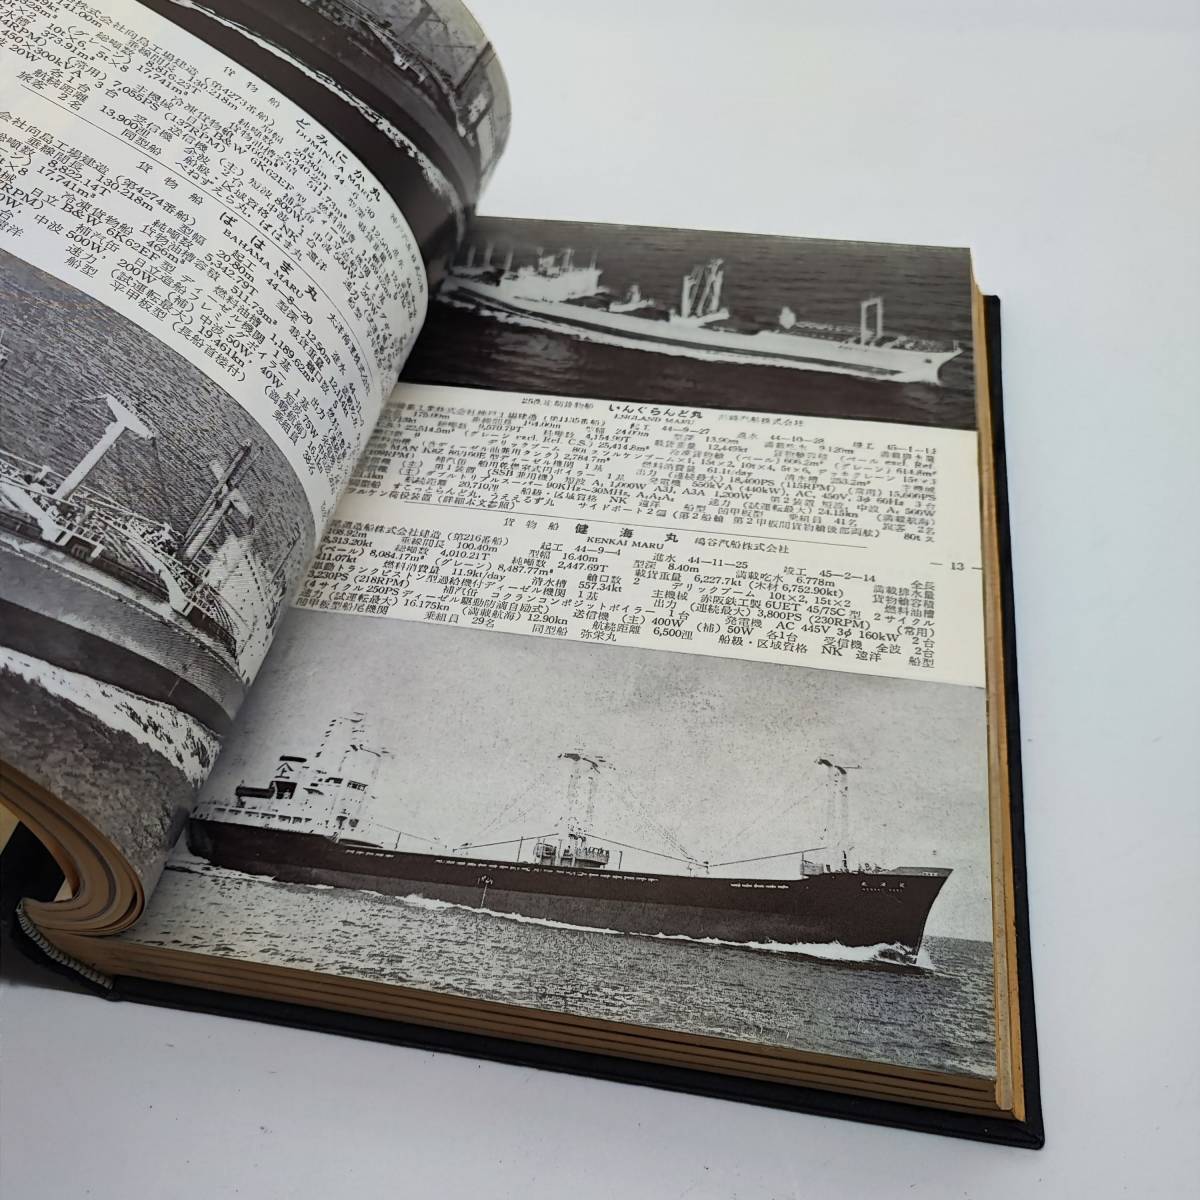 [ rare * special equipment?] boat. science no. 23 volume on volume | under volume set Showa era 45 year 1970 year 1 month ~12 month 12 pcs. minute 60 size 